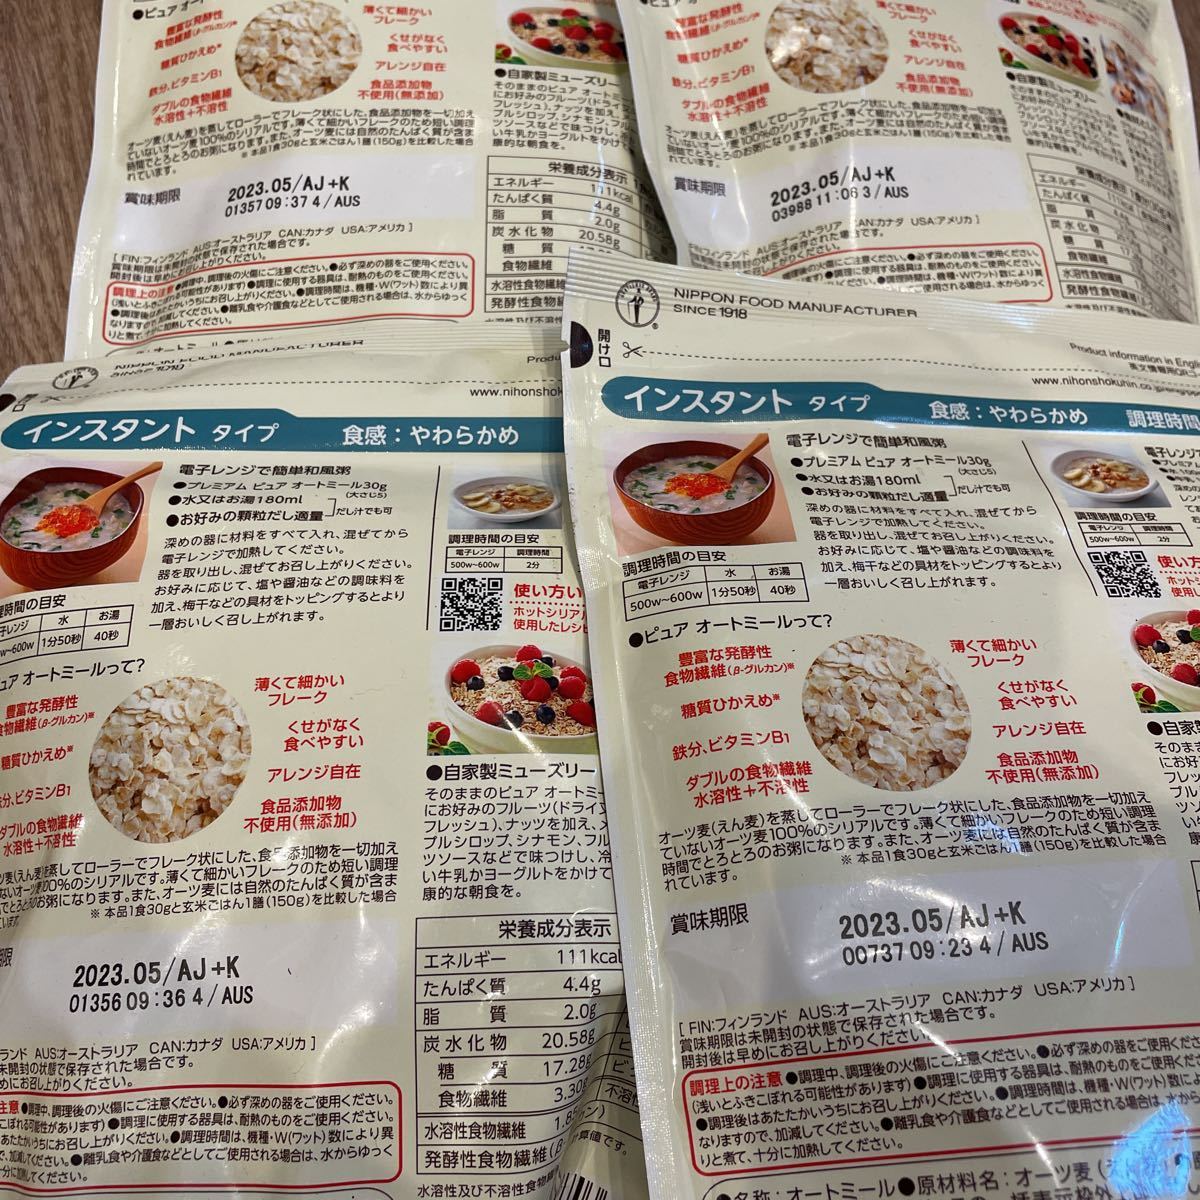  meal charge goods assortment large amount set together preservation meal Alpha rice pre-packaged rice auto mi-ru outdoor strategic reserve disaster emergency rations disaster prevention long time period preservation meal 